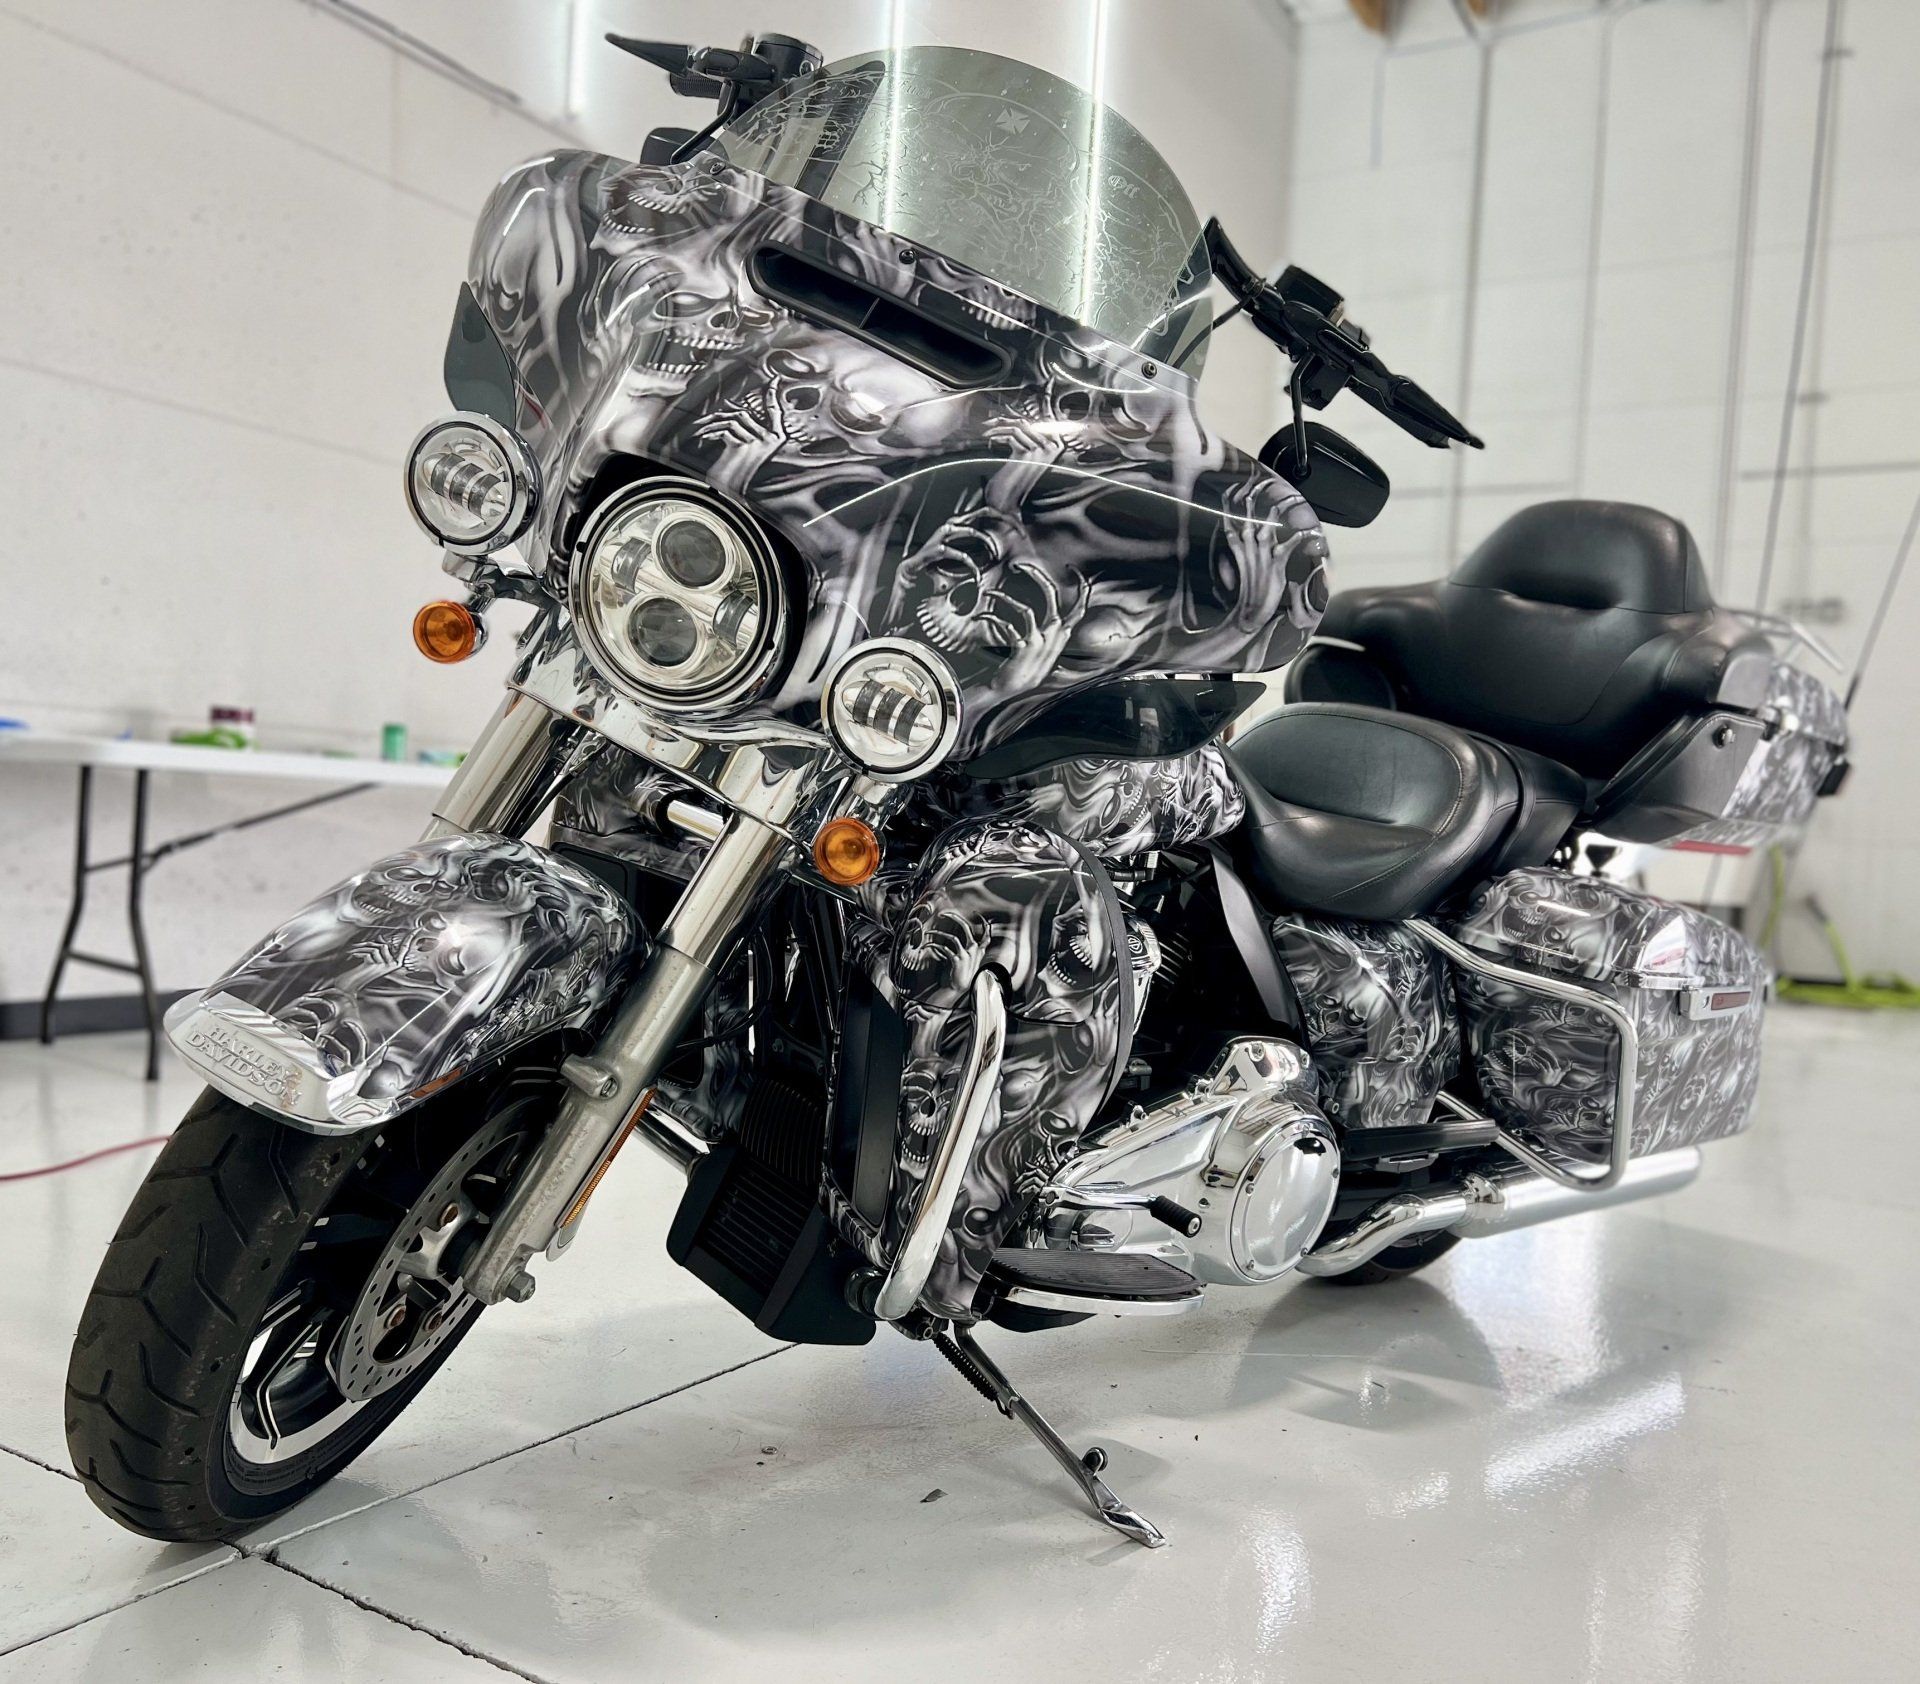 A Harley Davidson motorcycle with a camouflage paint job is parked in a garage.